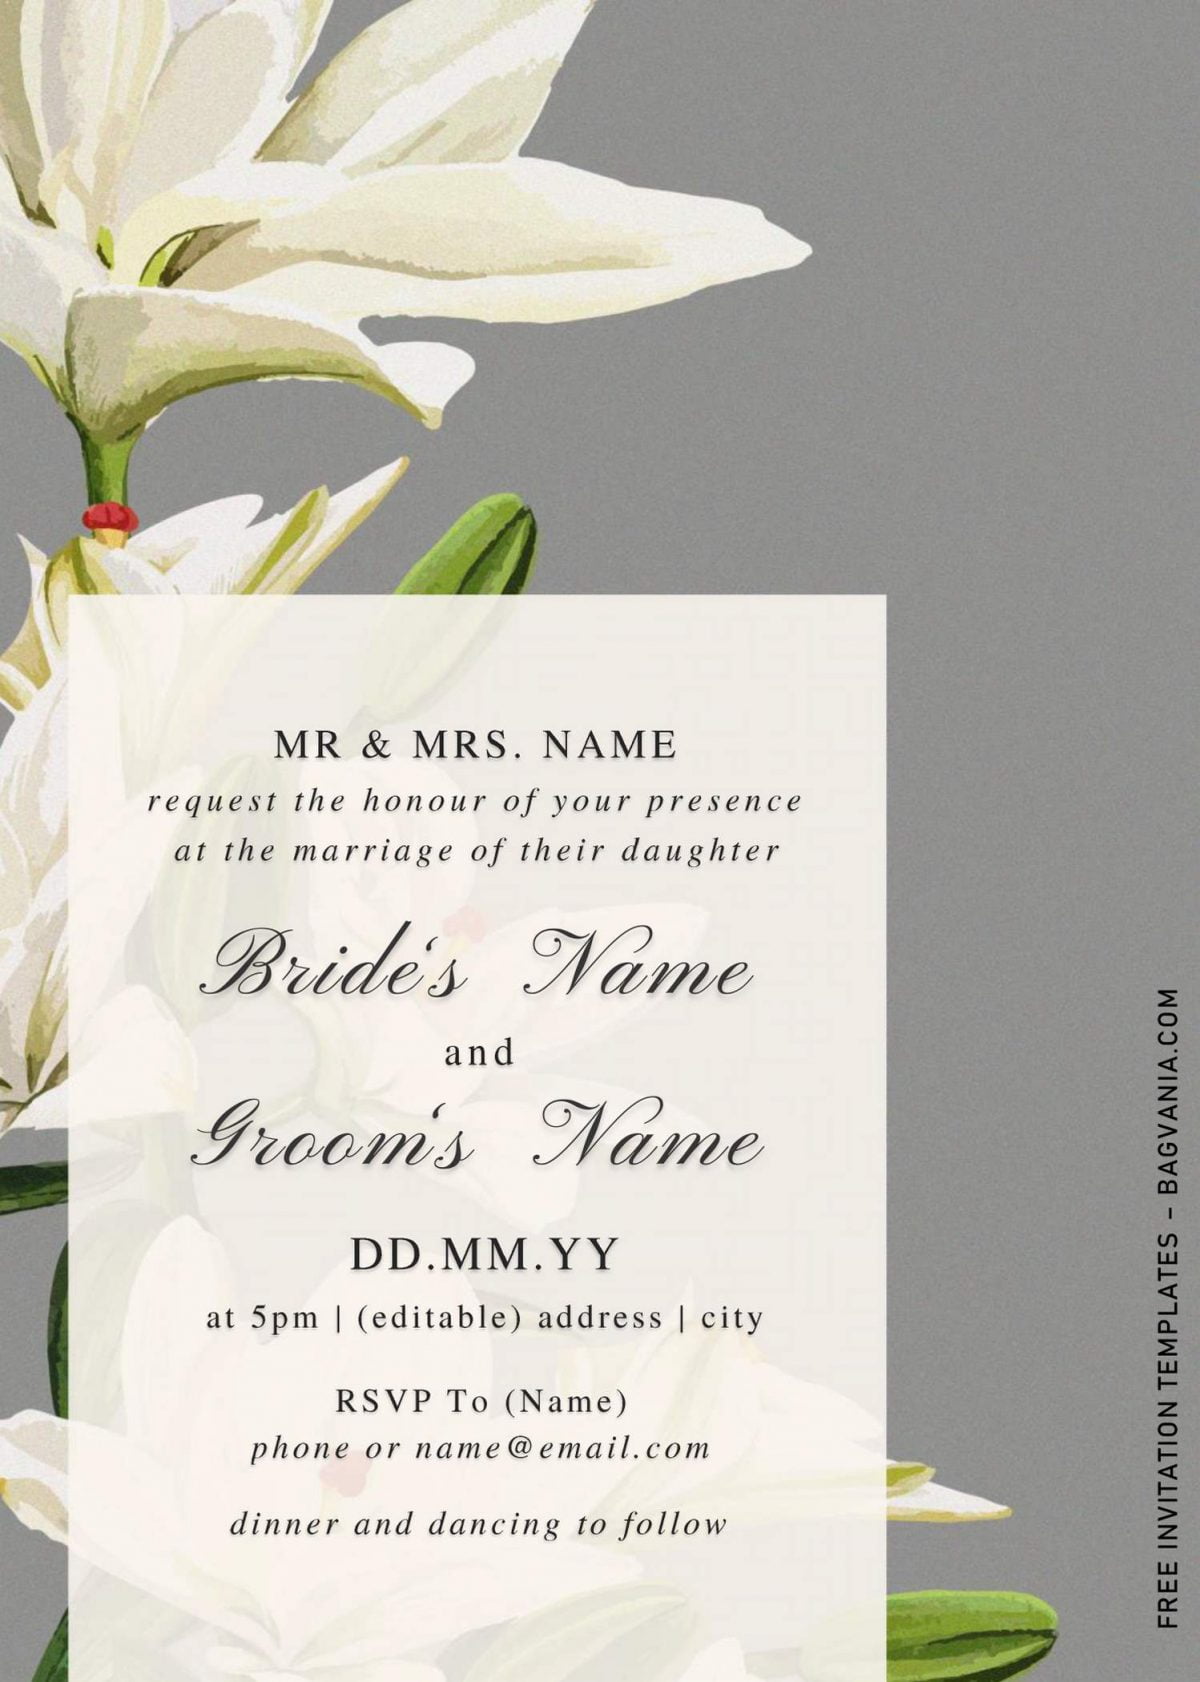 Free Watercolor Lily Wedding Invitation Templates For Word and has white text box and minimalist design